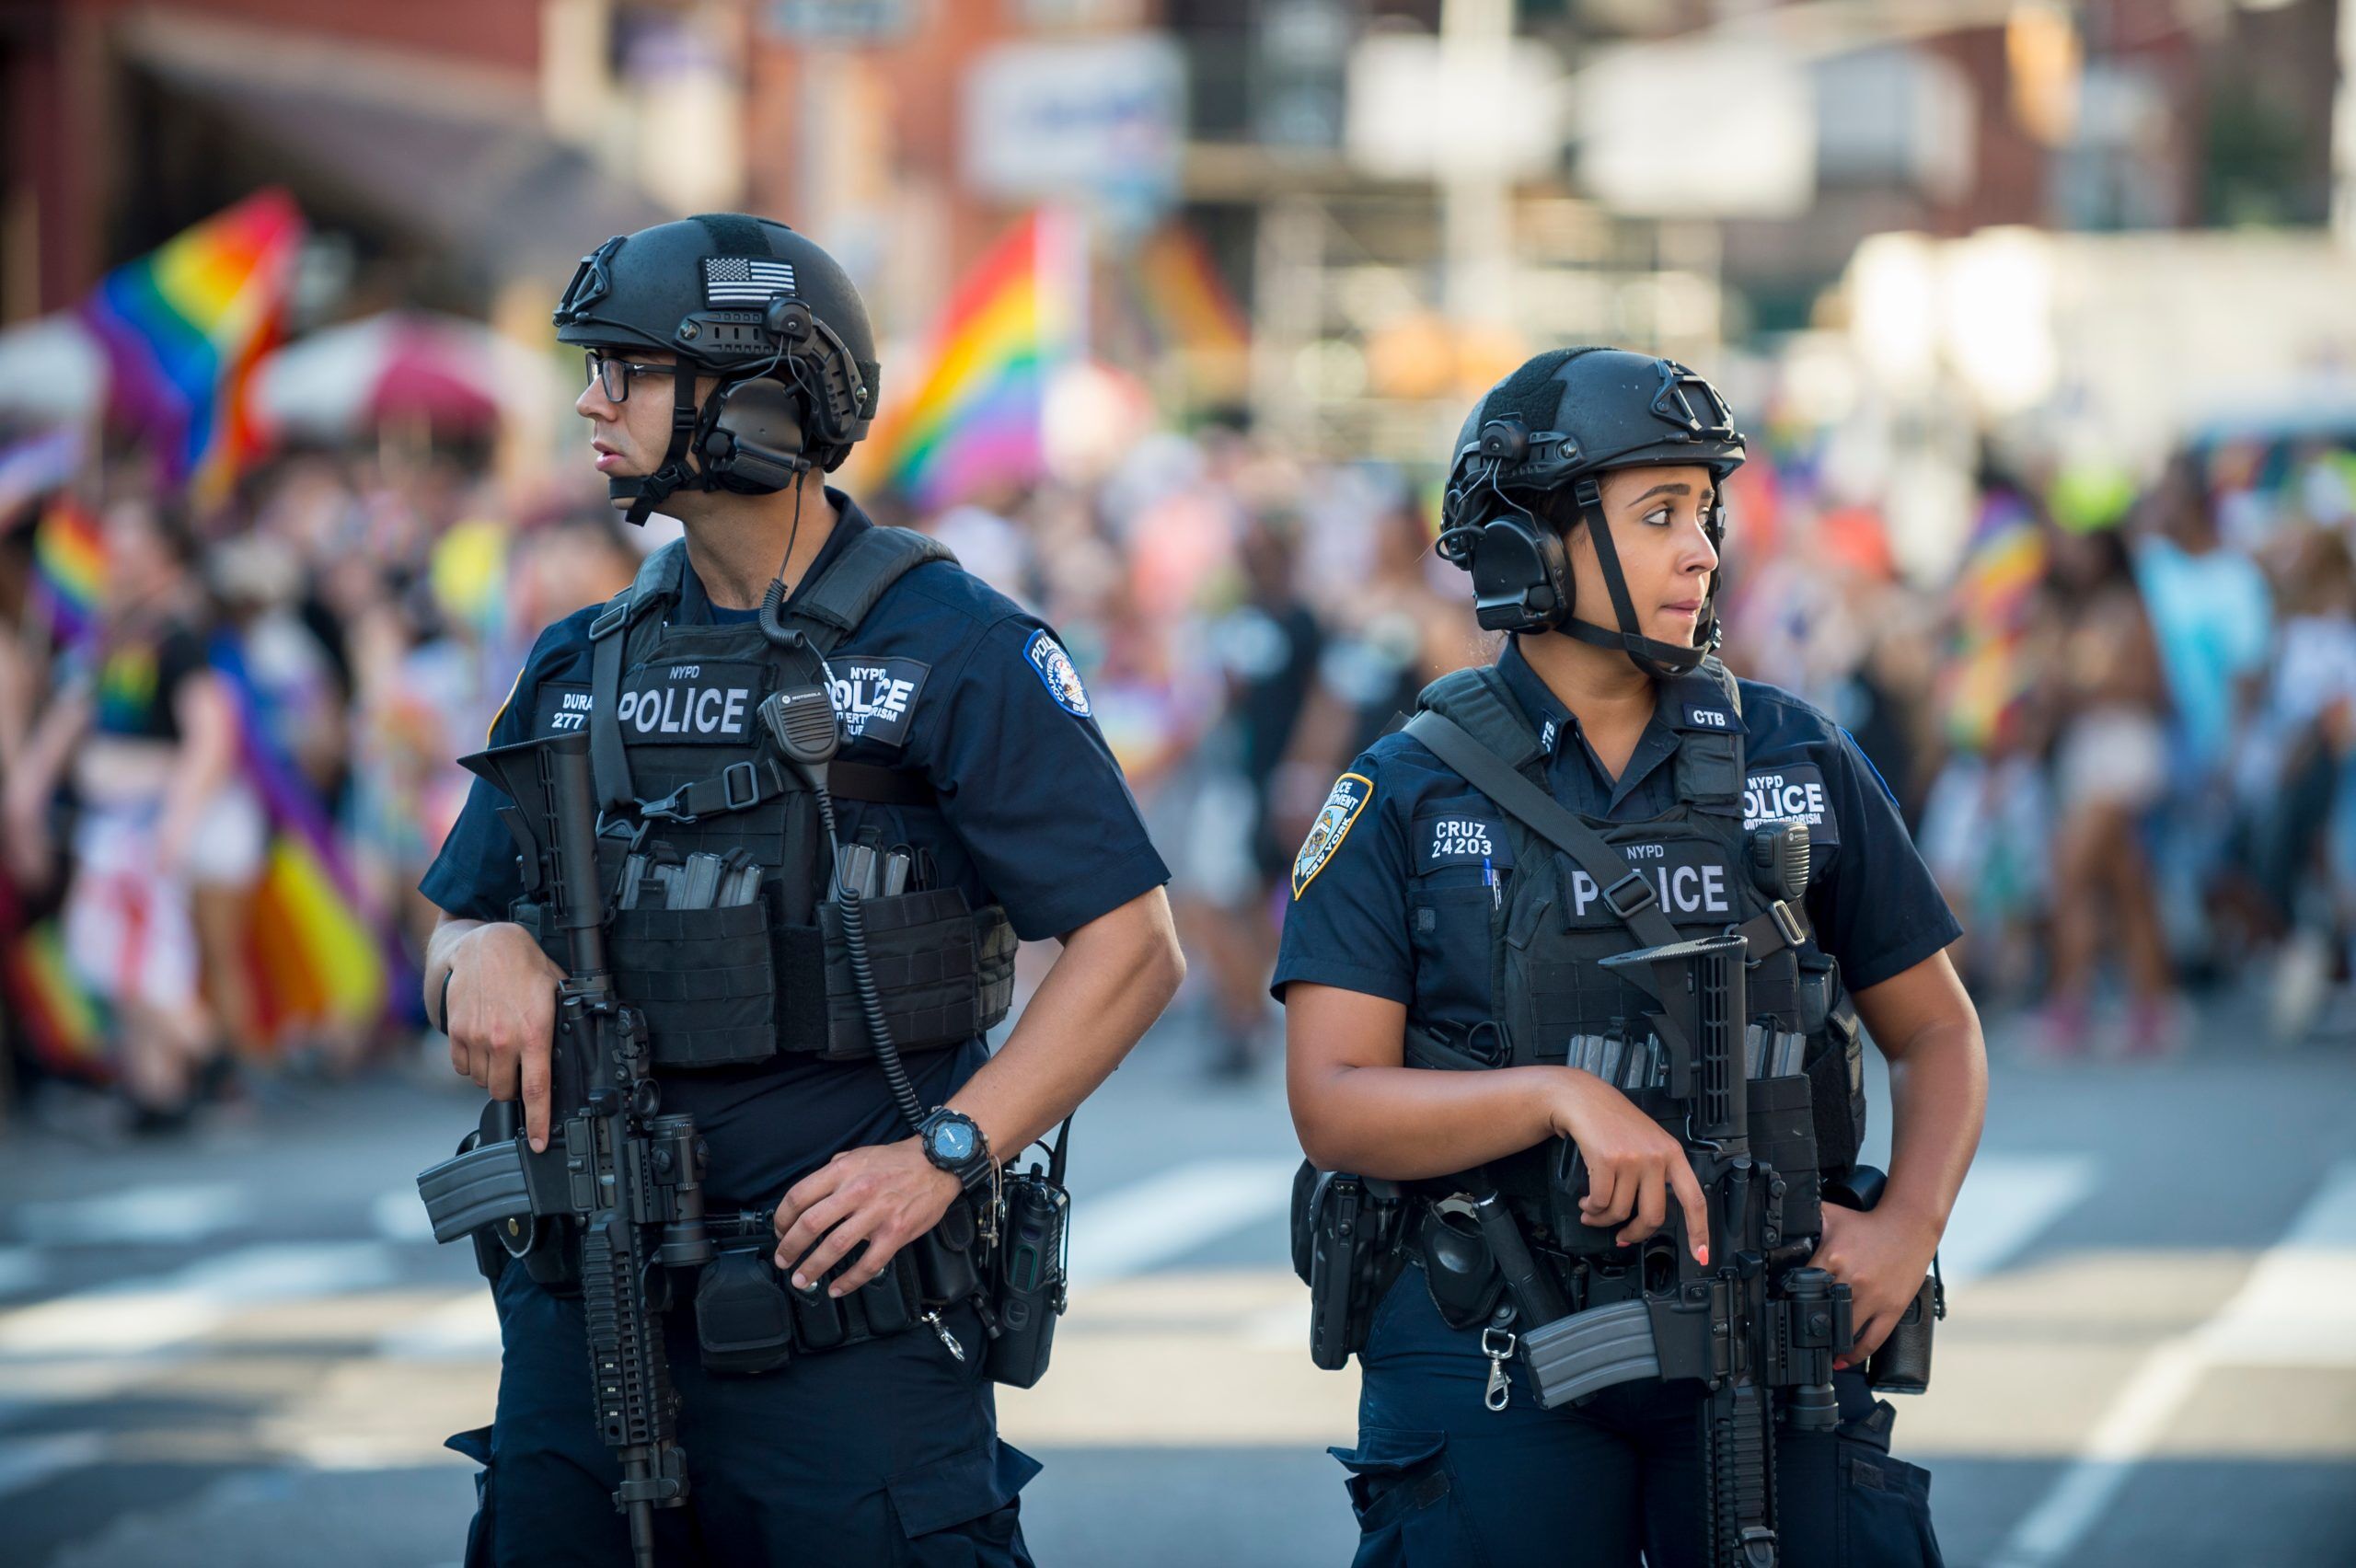 JUNE 25, 2017: NYPD police officers stand with hands on their weapons, providing security on the sidelines of the annual Gay Pride parade as it passes through Greenwich Village.